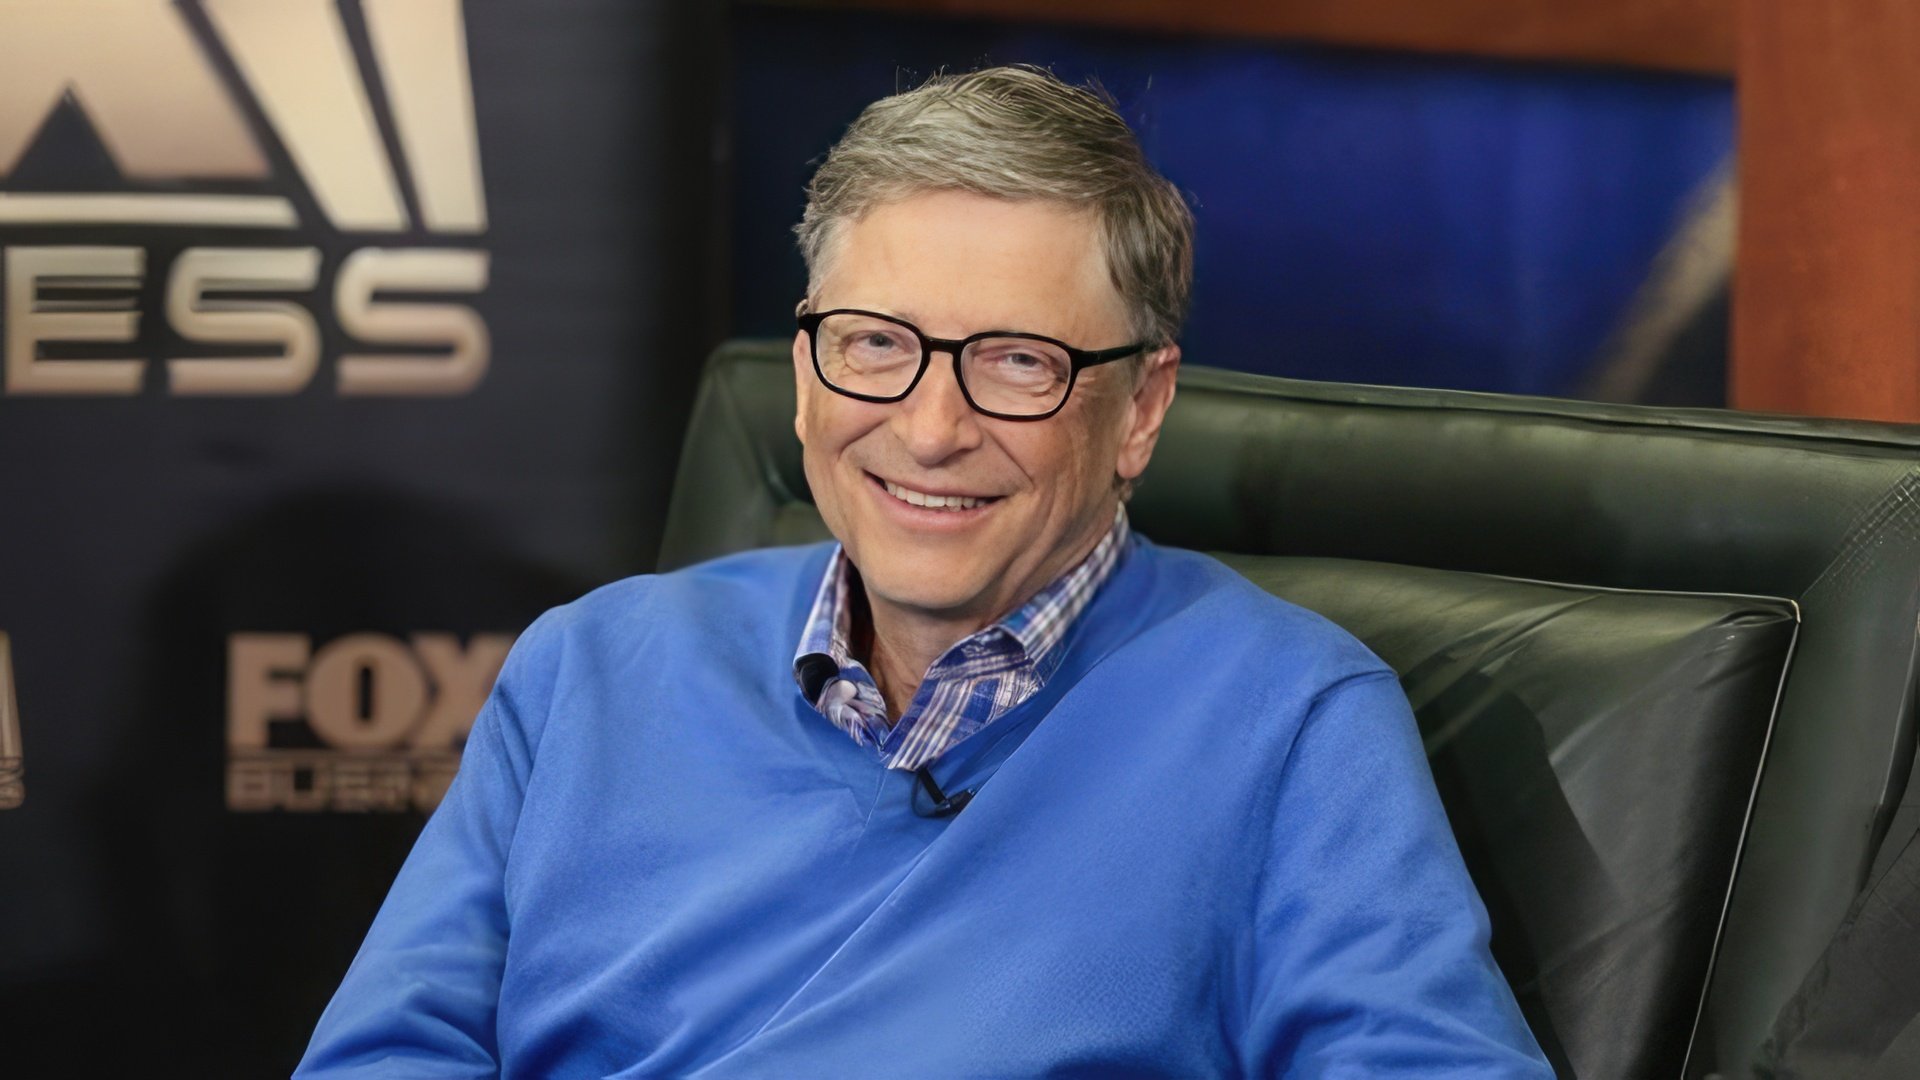 Bill Gates has donated over $30 billion to charitable causes